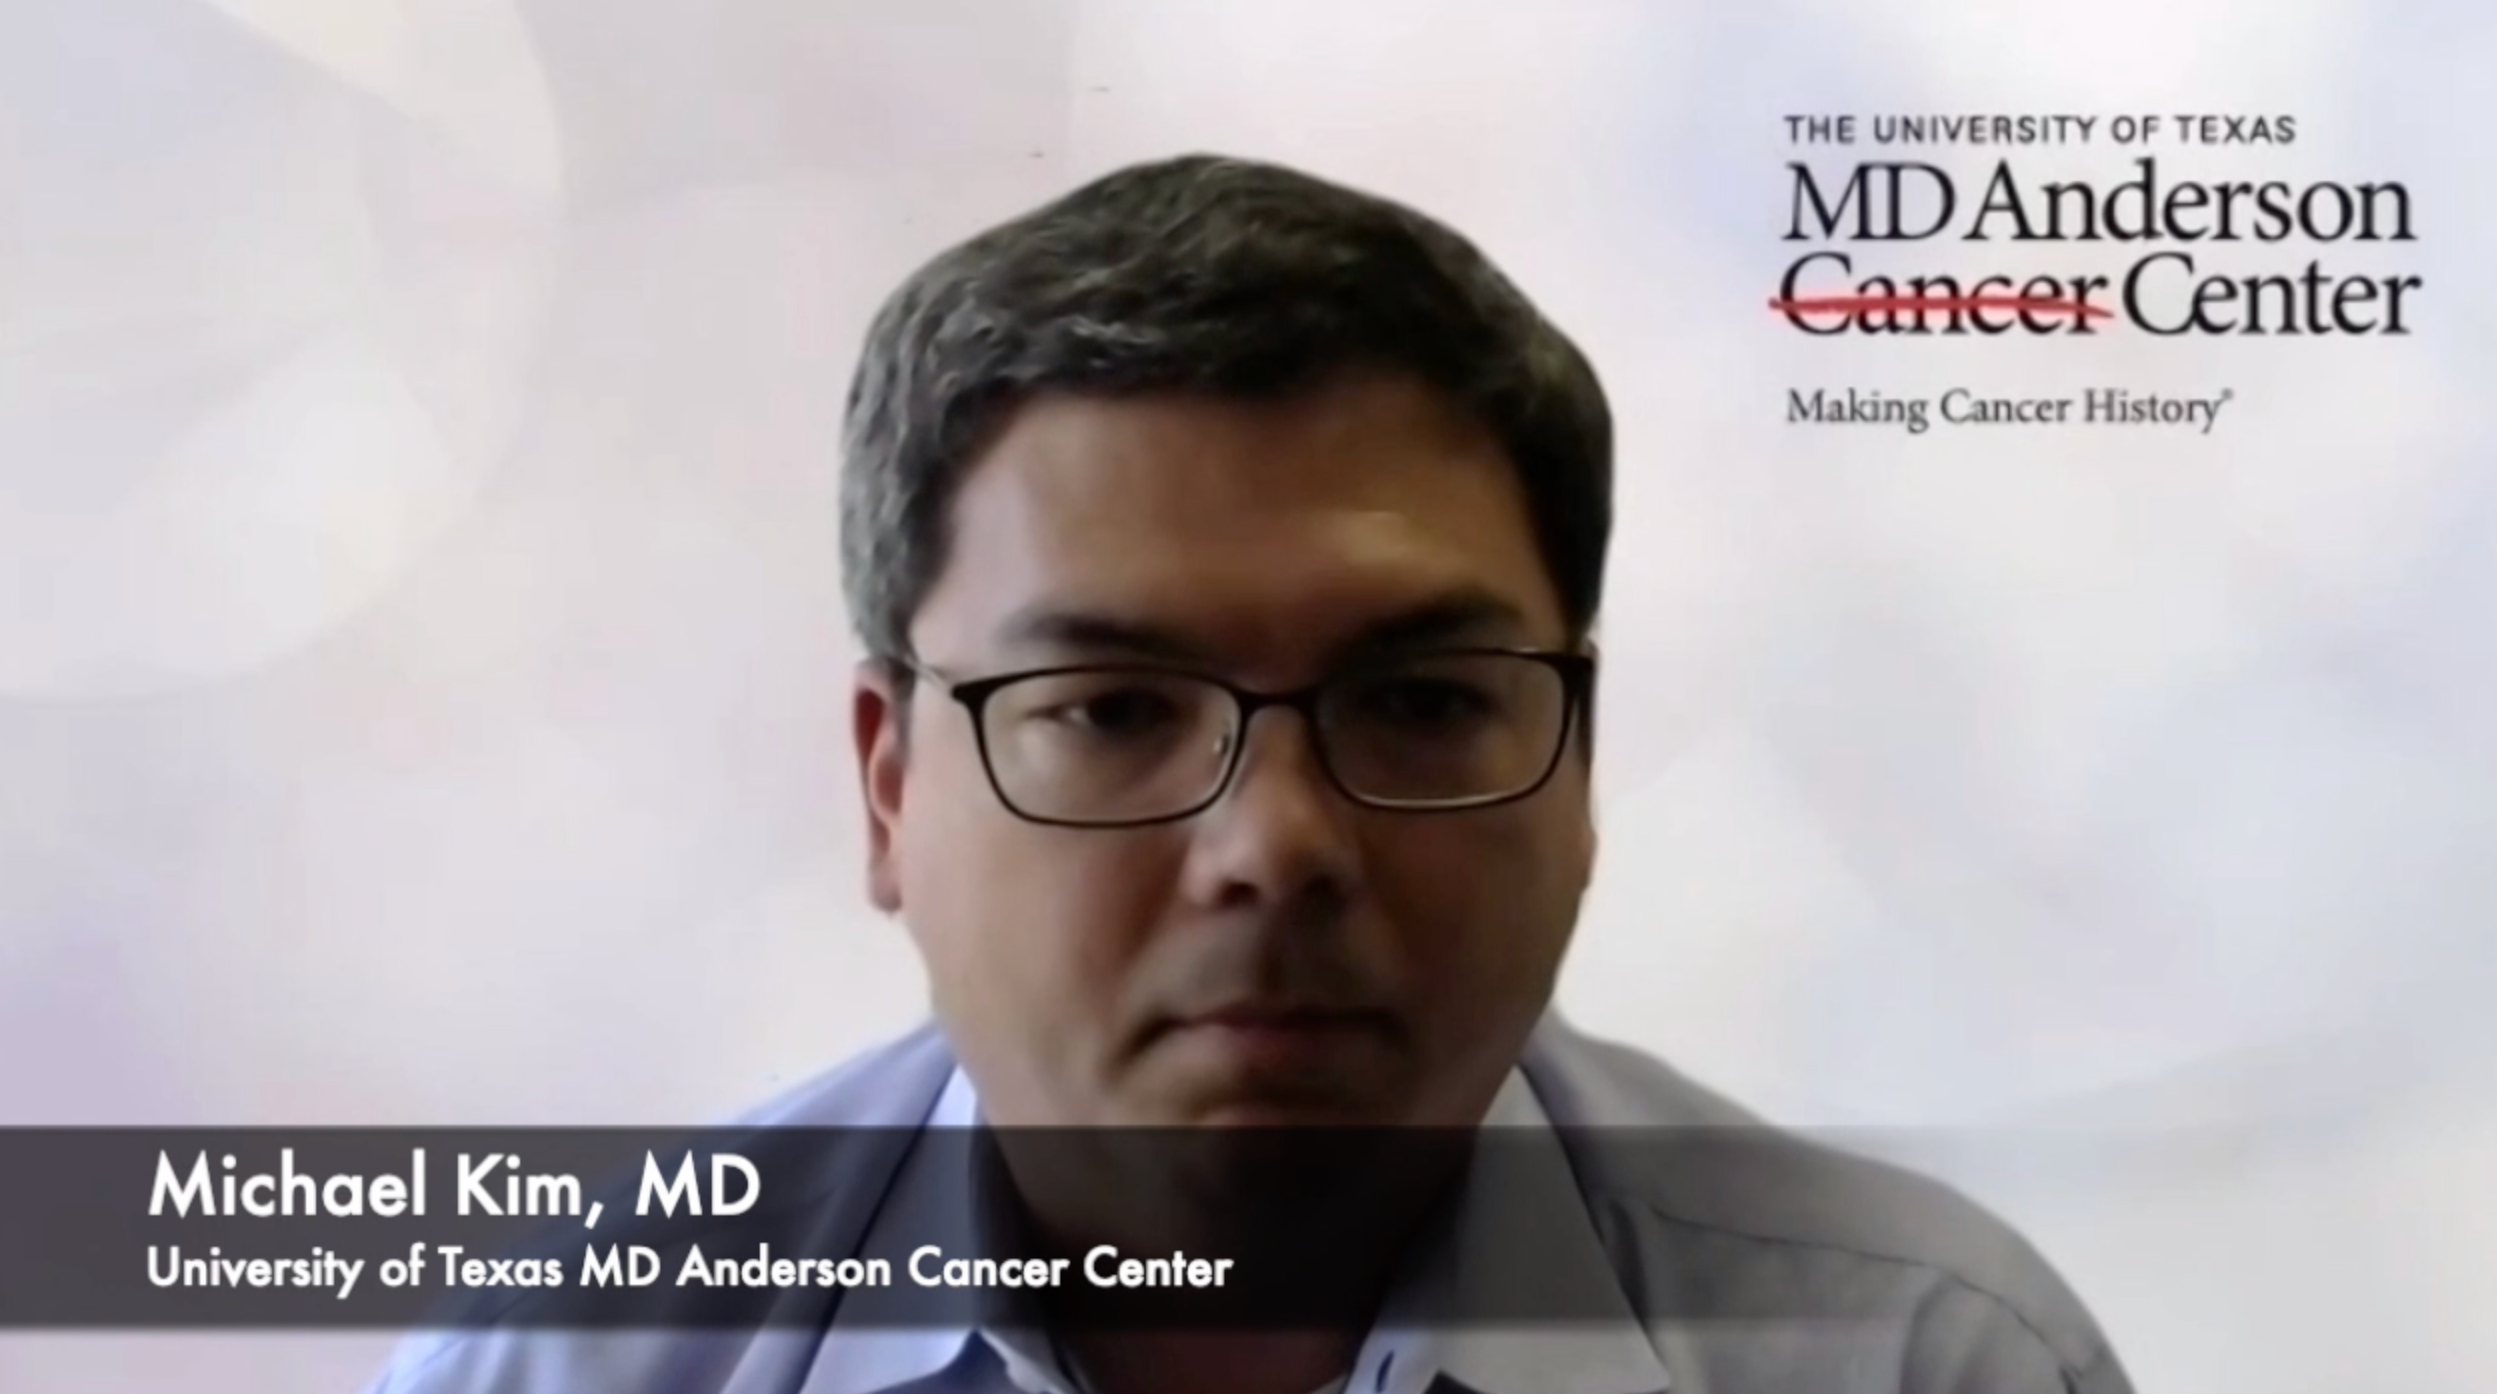 Michael Kim, MD, on Developing More CREB Inhibitors in Pancreatic Cancer Moving Forward